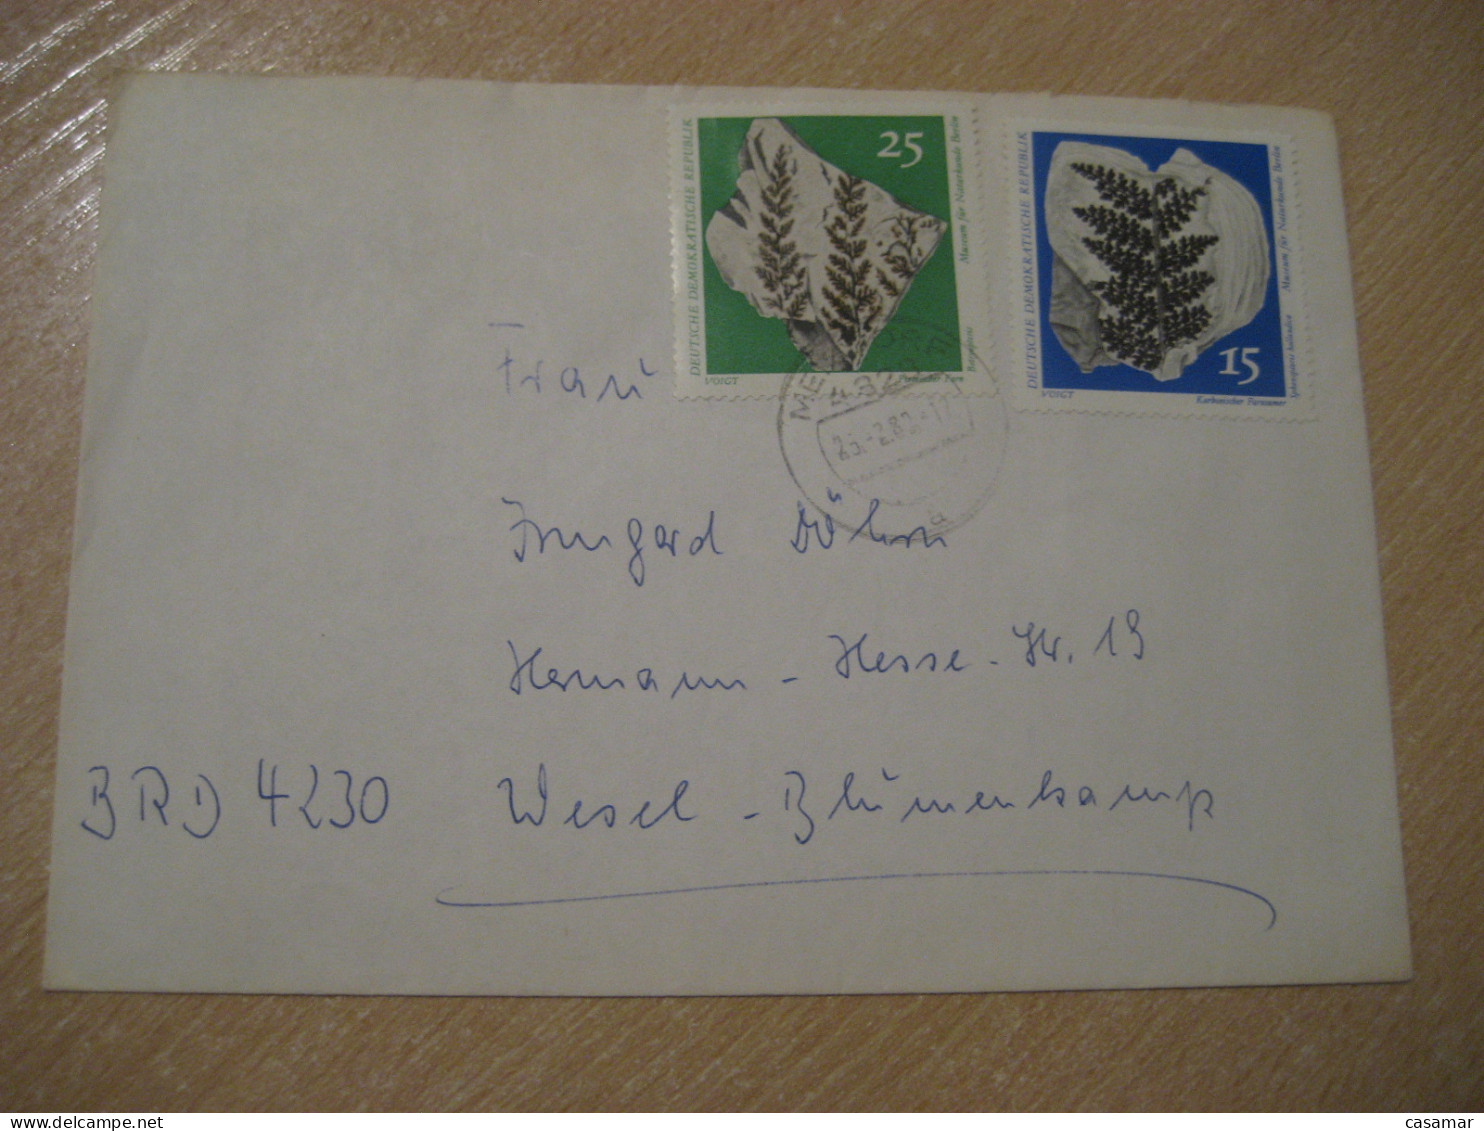 MEISDORF 198? To Wesel Cancel Cover DDR GERMANY Fossil Fossils Animals Fossiles Geology Geologie - Fossielen